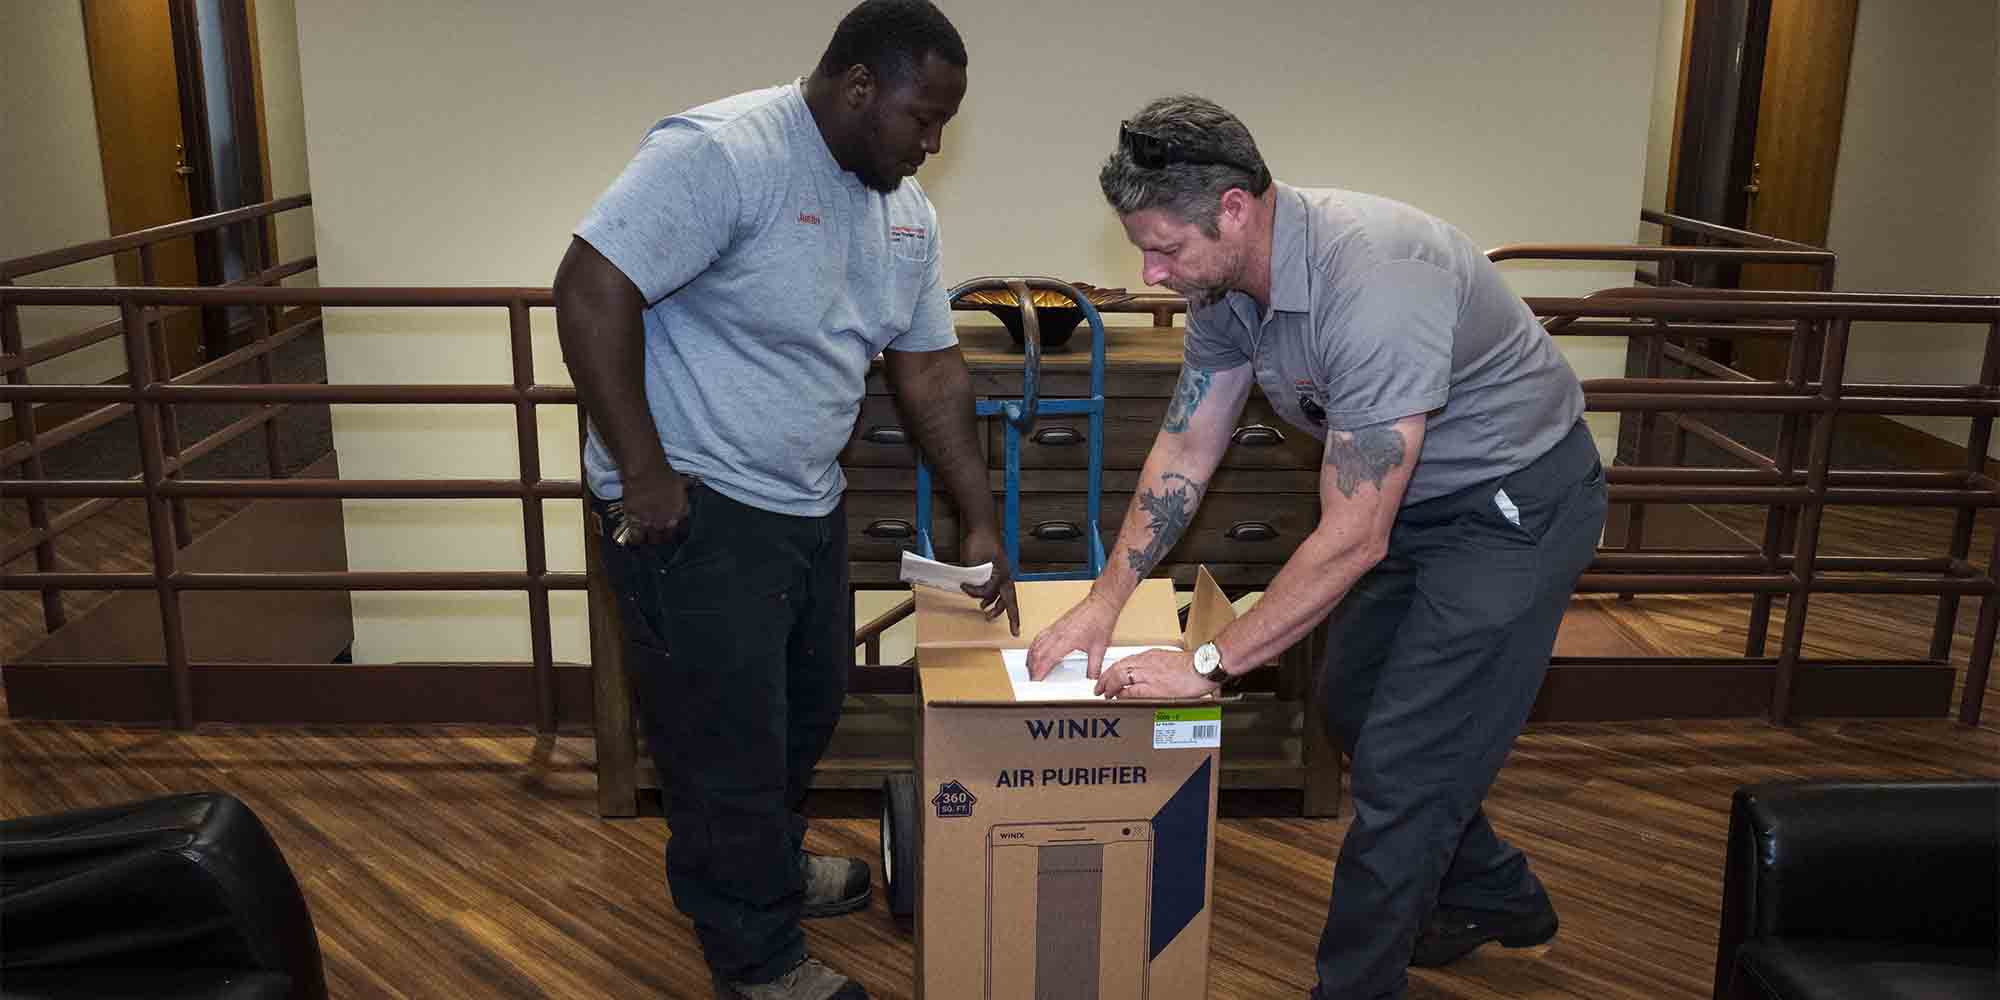 Image of laborers indoors opening an air purifier box